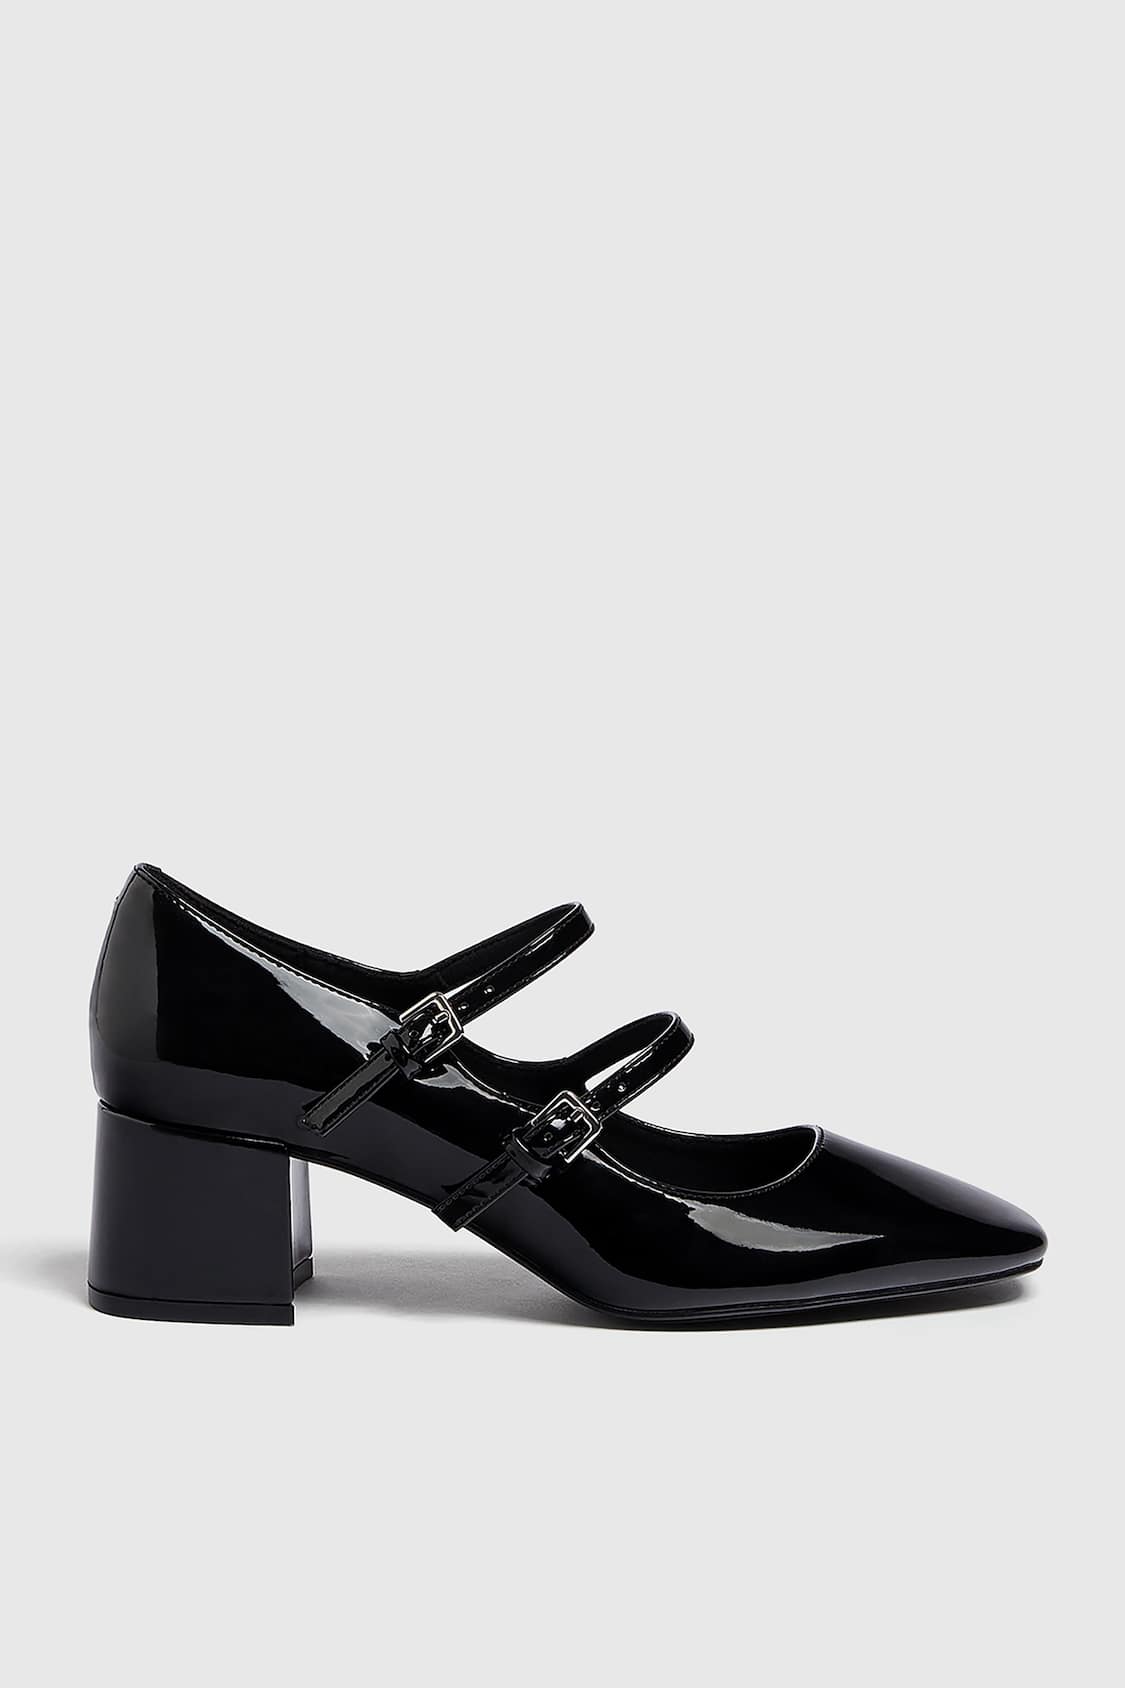 PULL & BEAR PATENT LEATHER MARYJANE SHOES IN BLACK